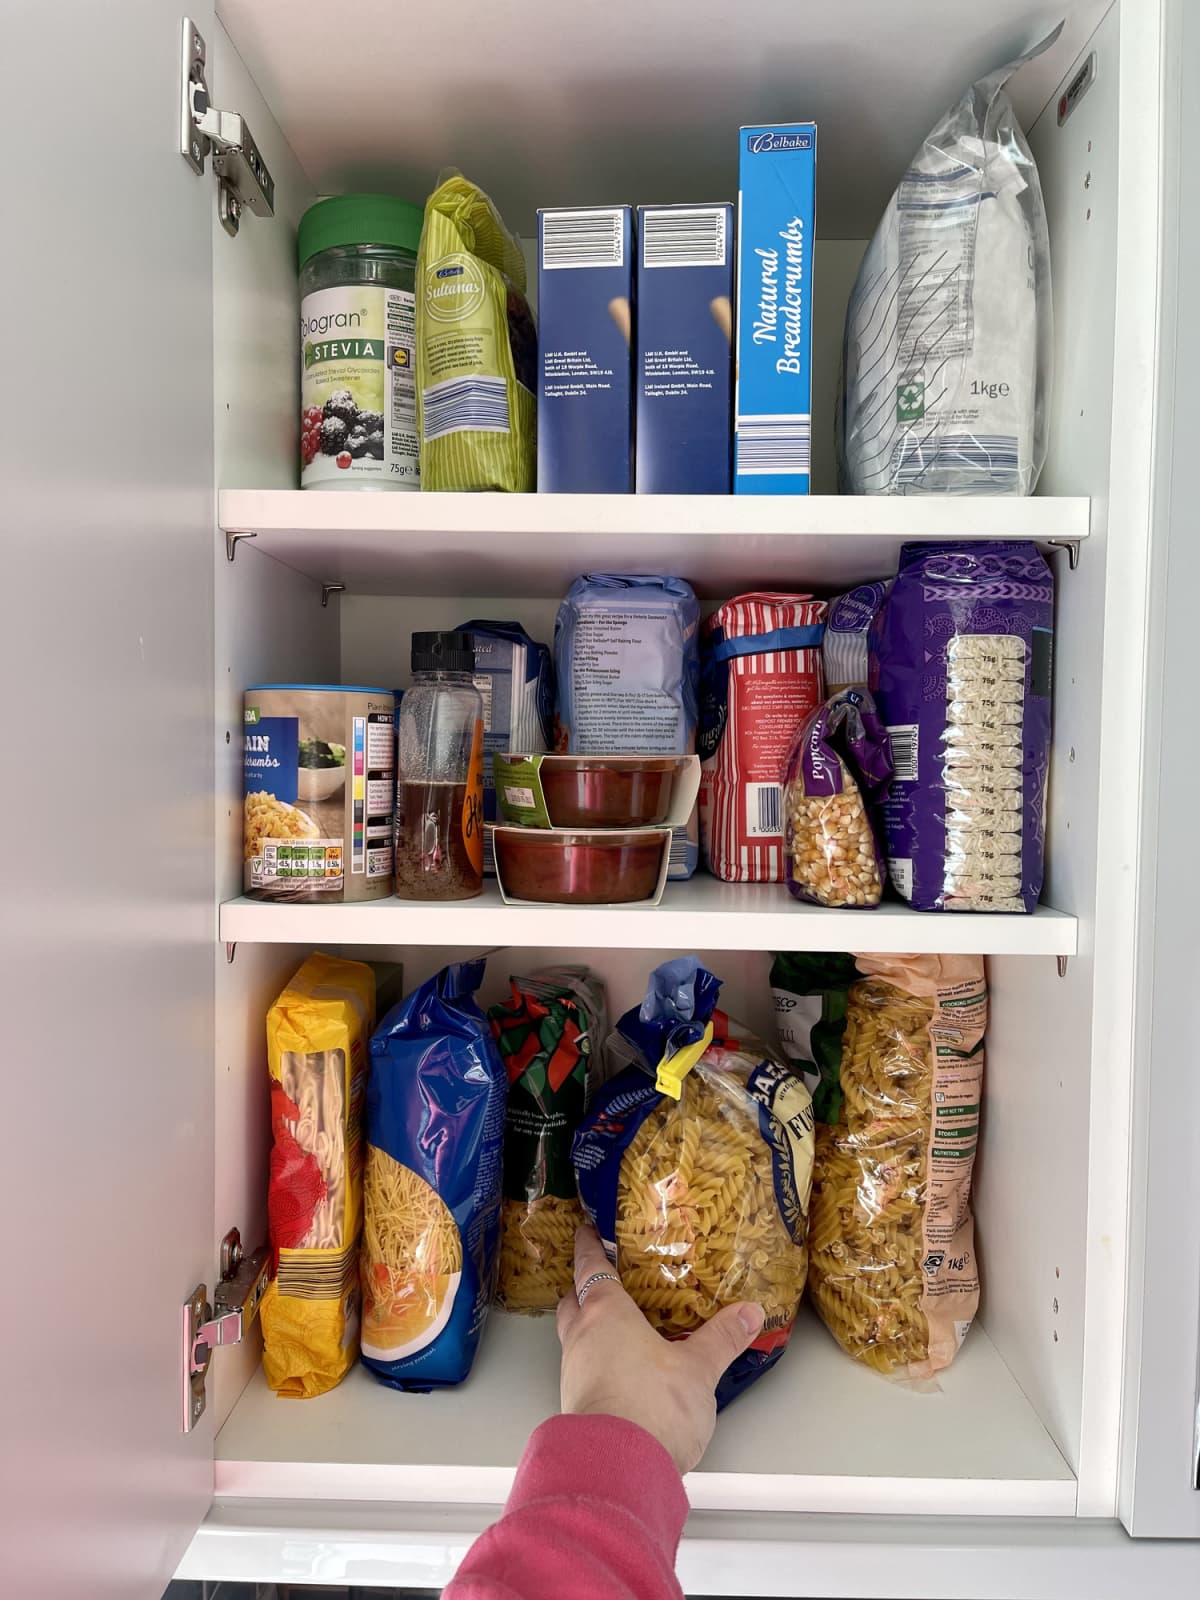 Cabinet stocked with all sorts of dry foods like pasta, noodles, rice, flour, sugar and more